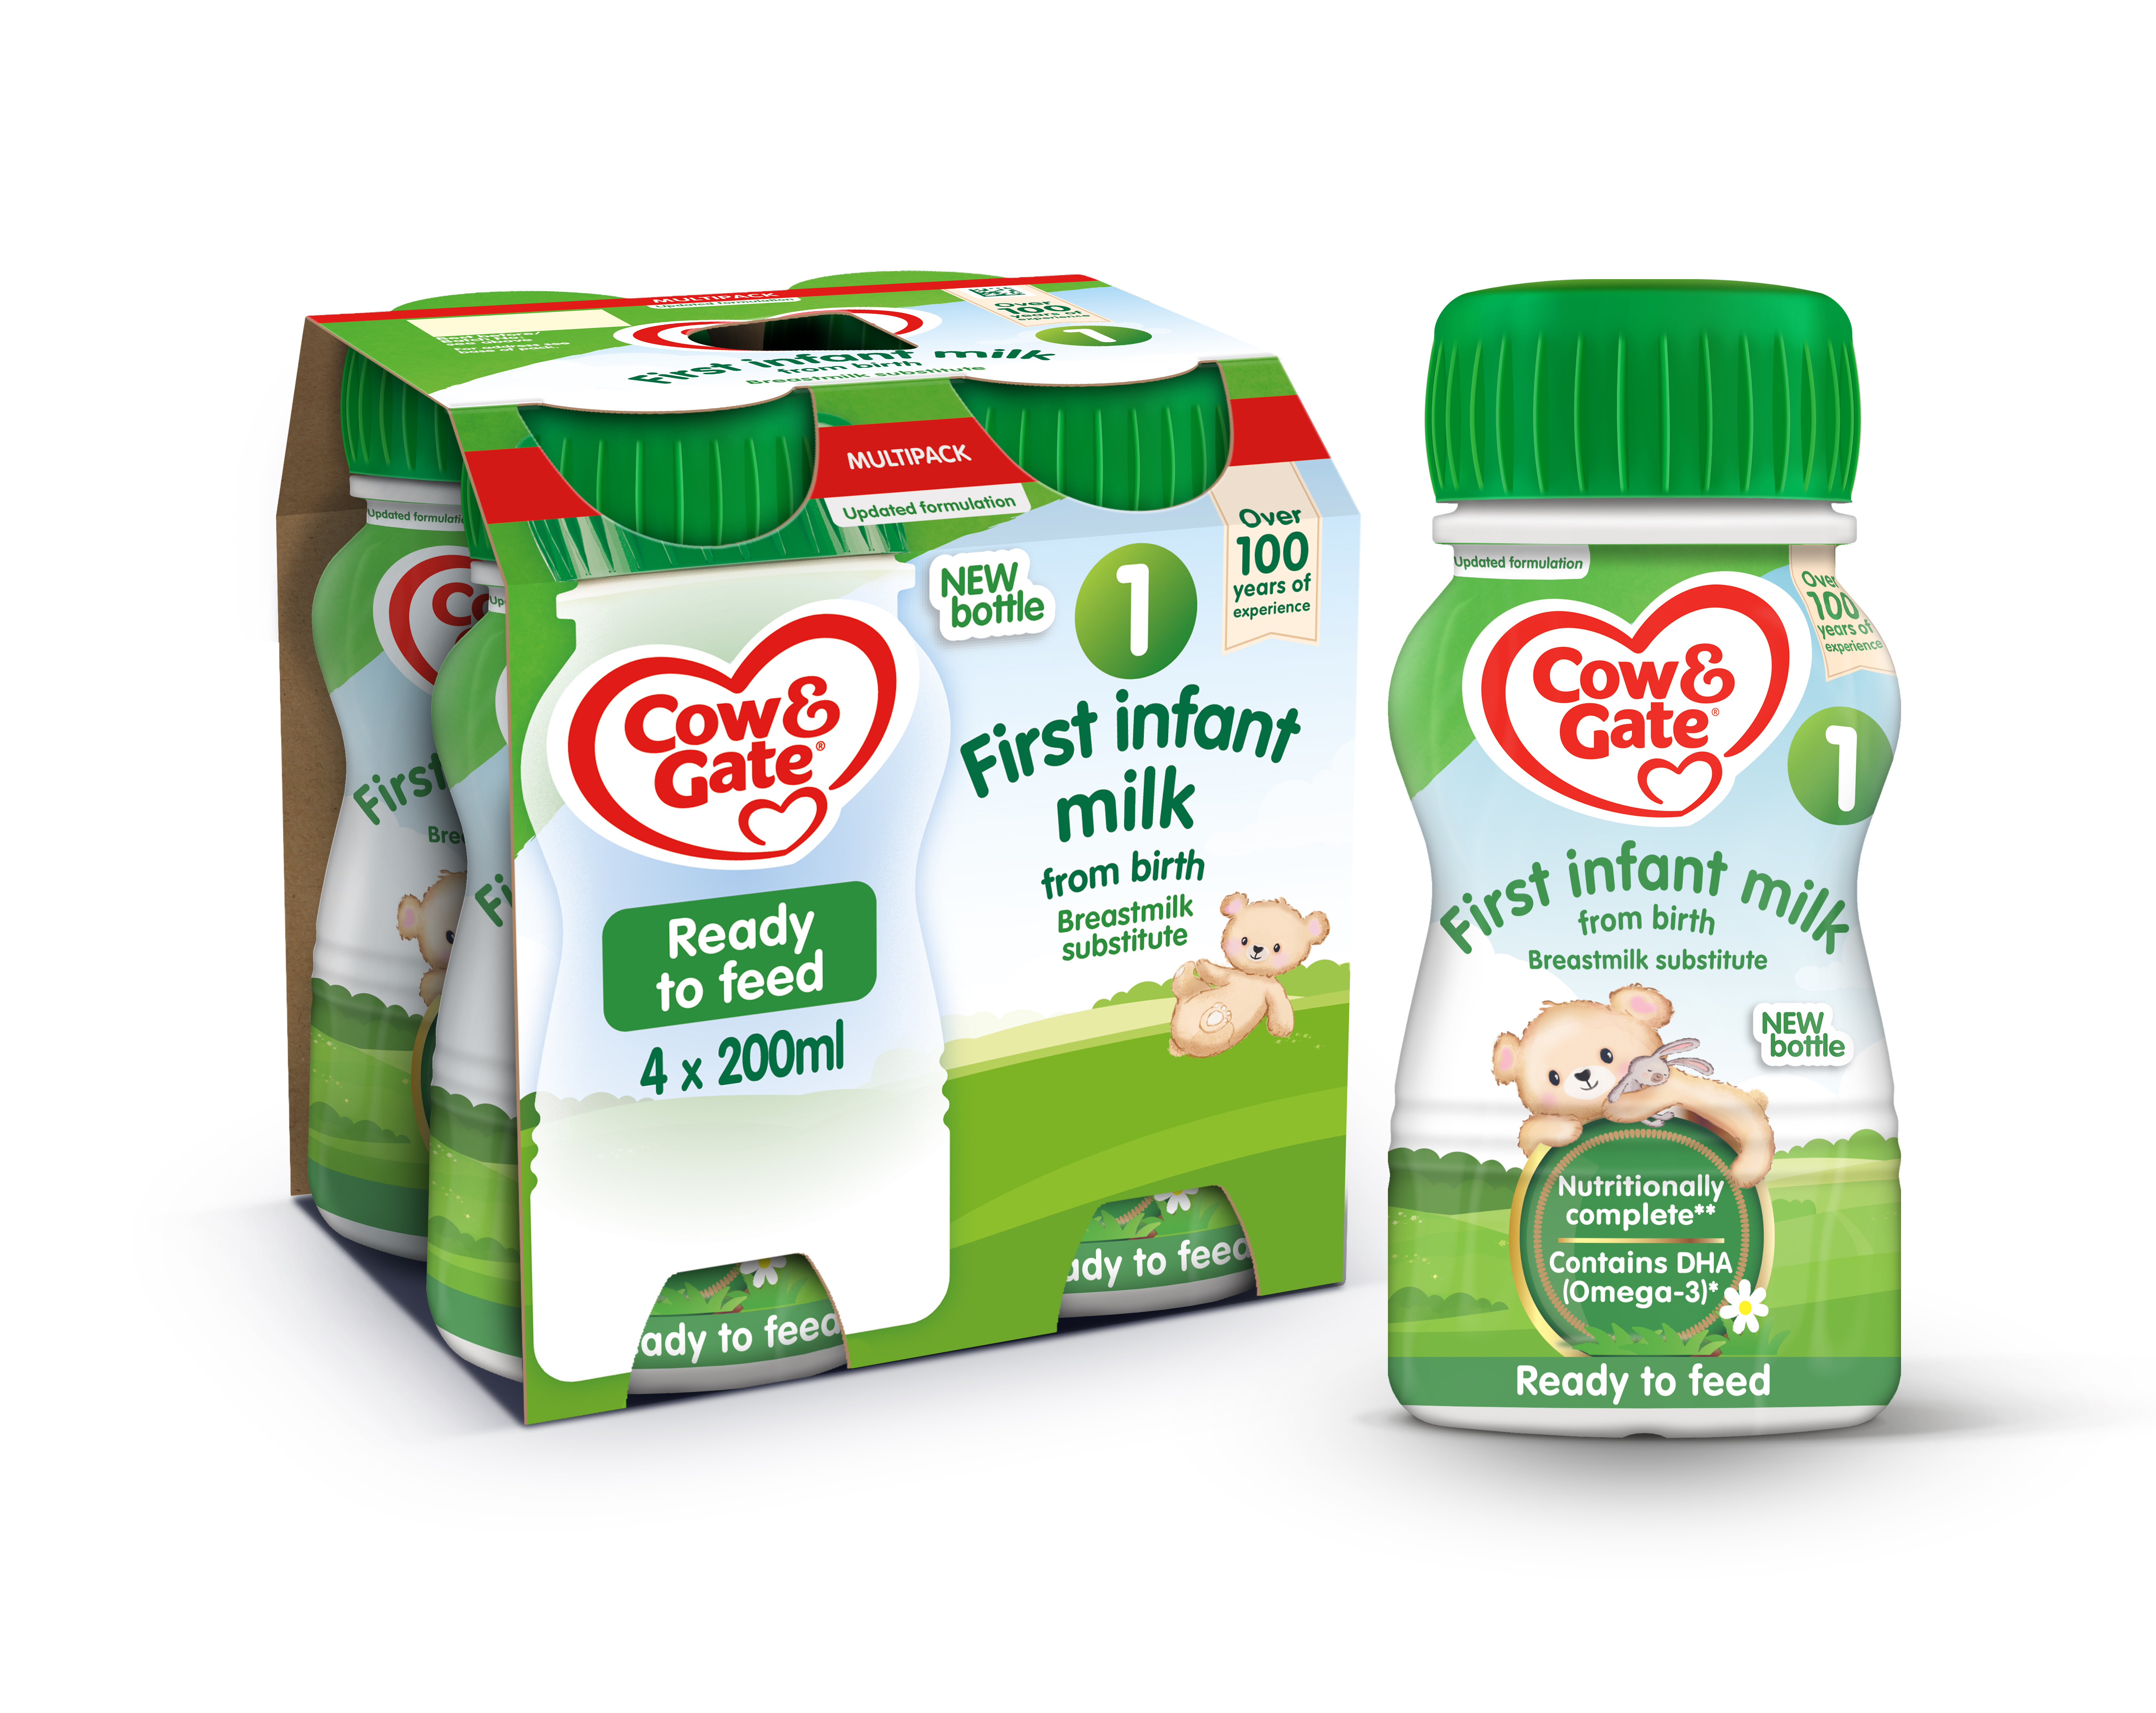 Cow & Gate Ready To Feed First Infant Milk  4x200ml